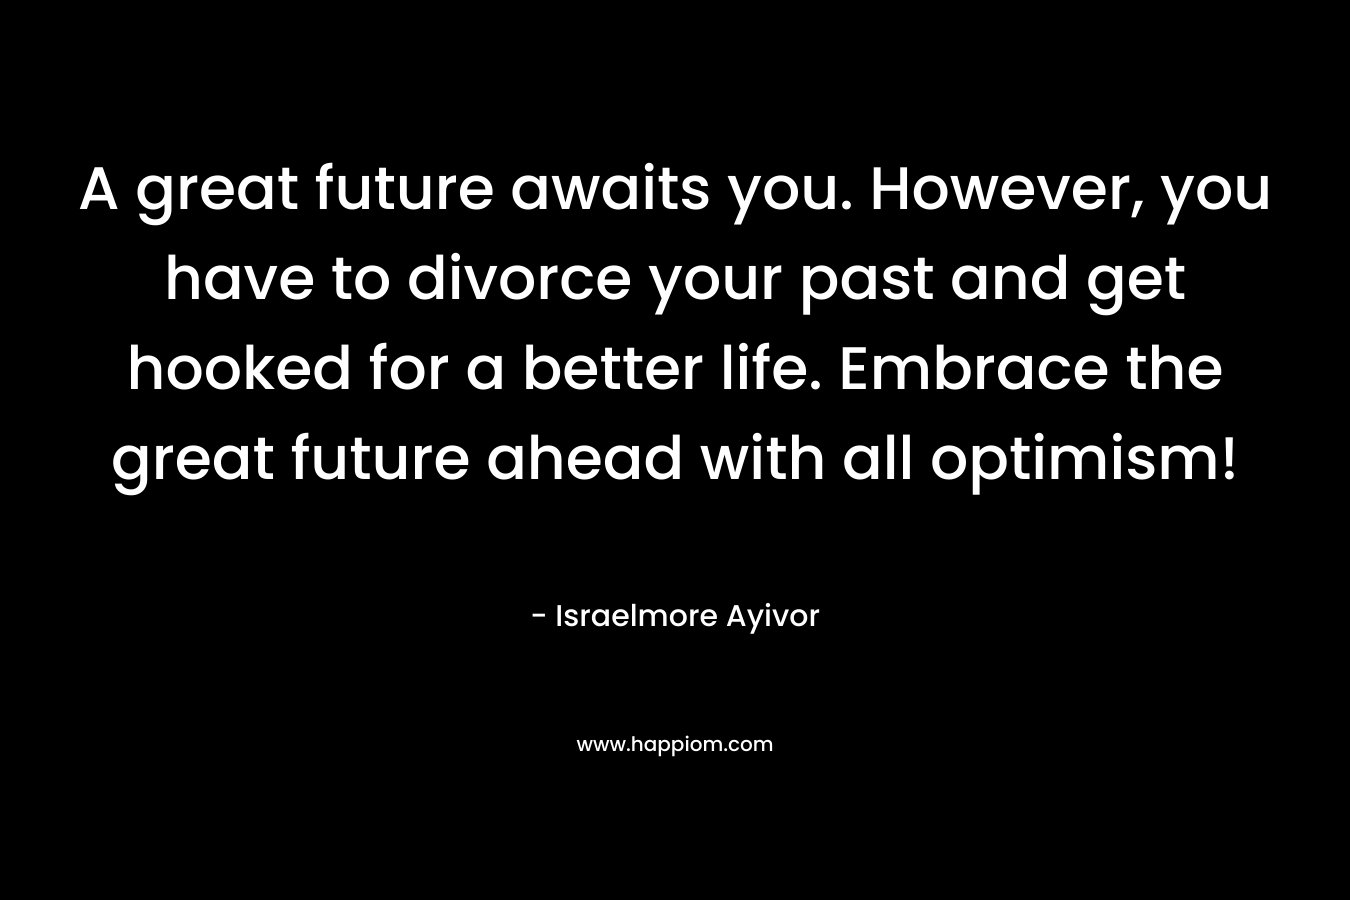 A great future awaits you. However, you have to divorce your past and get hooked for a better life. Embrace the great future ahead with all optimism!